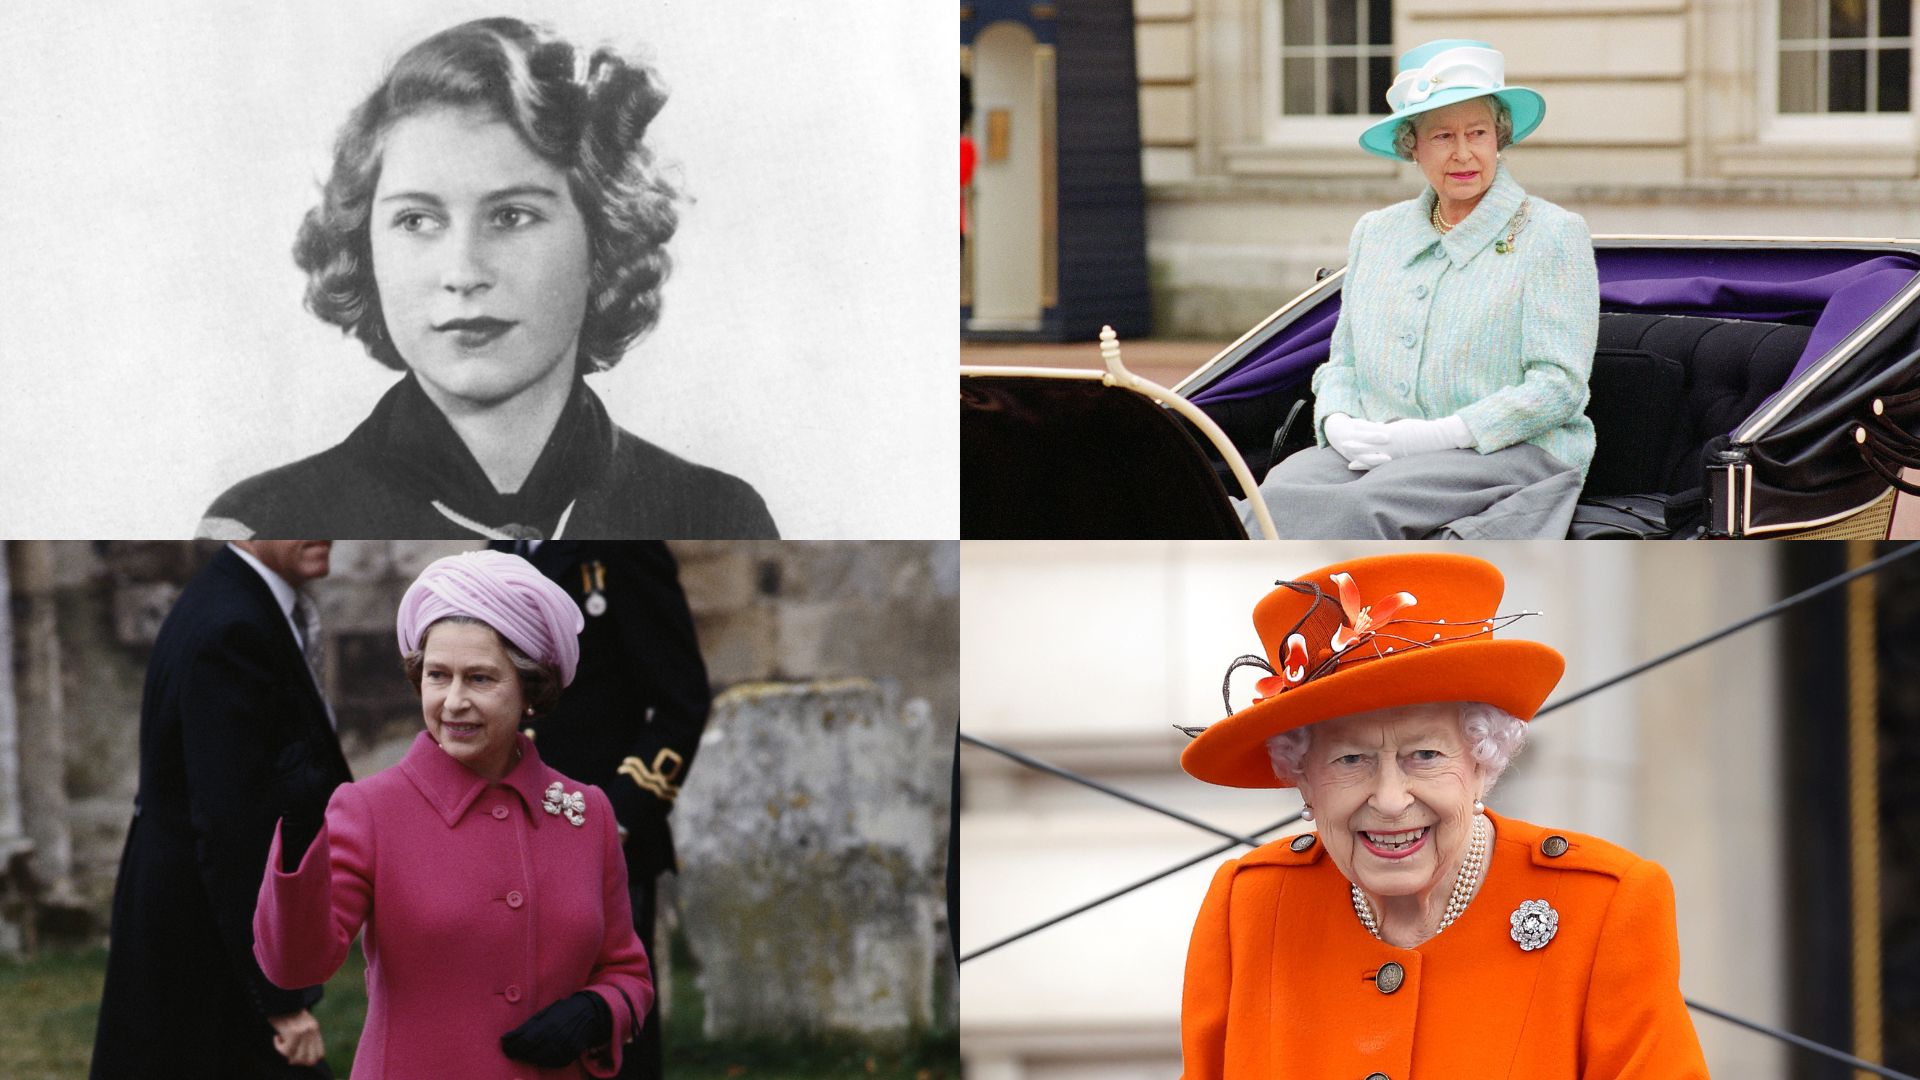 The Queen's bold birthday handbag is the ultimate celebration of